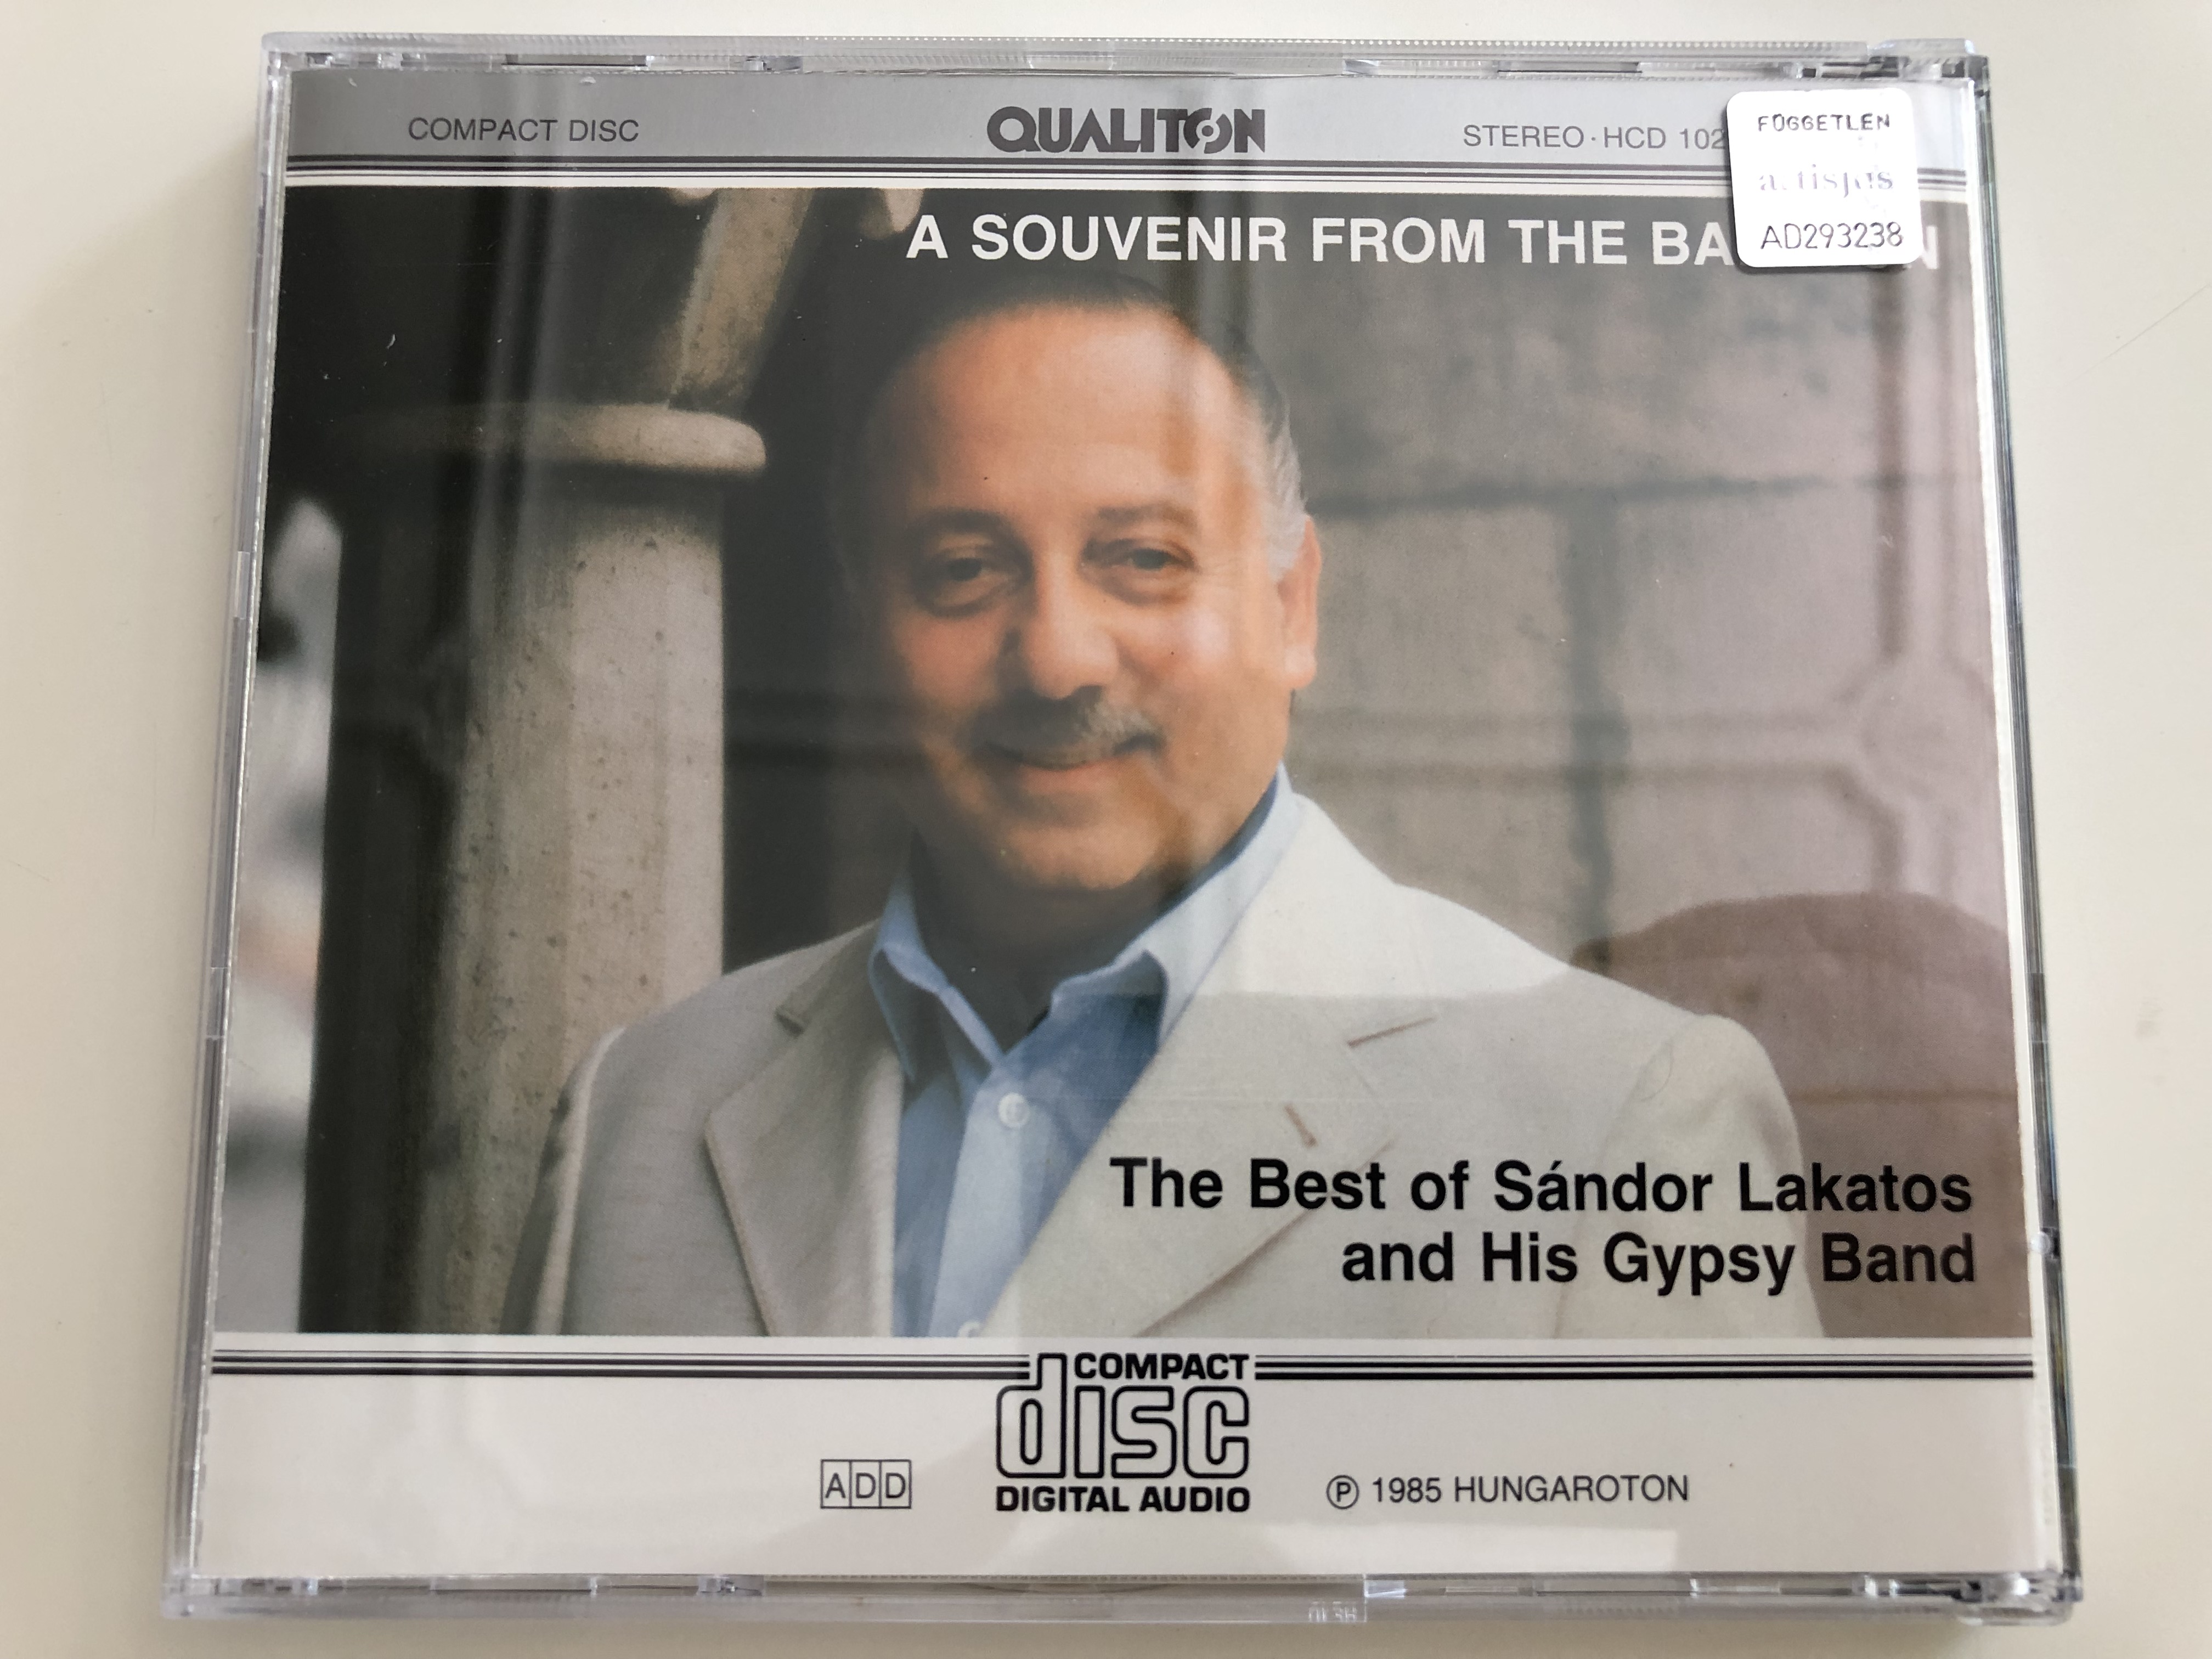 -a-souvenir-from-the-balaton-the-best-of-s-ndor-lakatos-his-gypsy-band-qualiton-hcd-10213-2-audio-cd-1985-4-.jpg